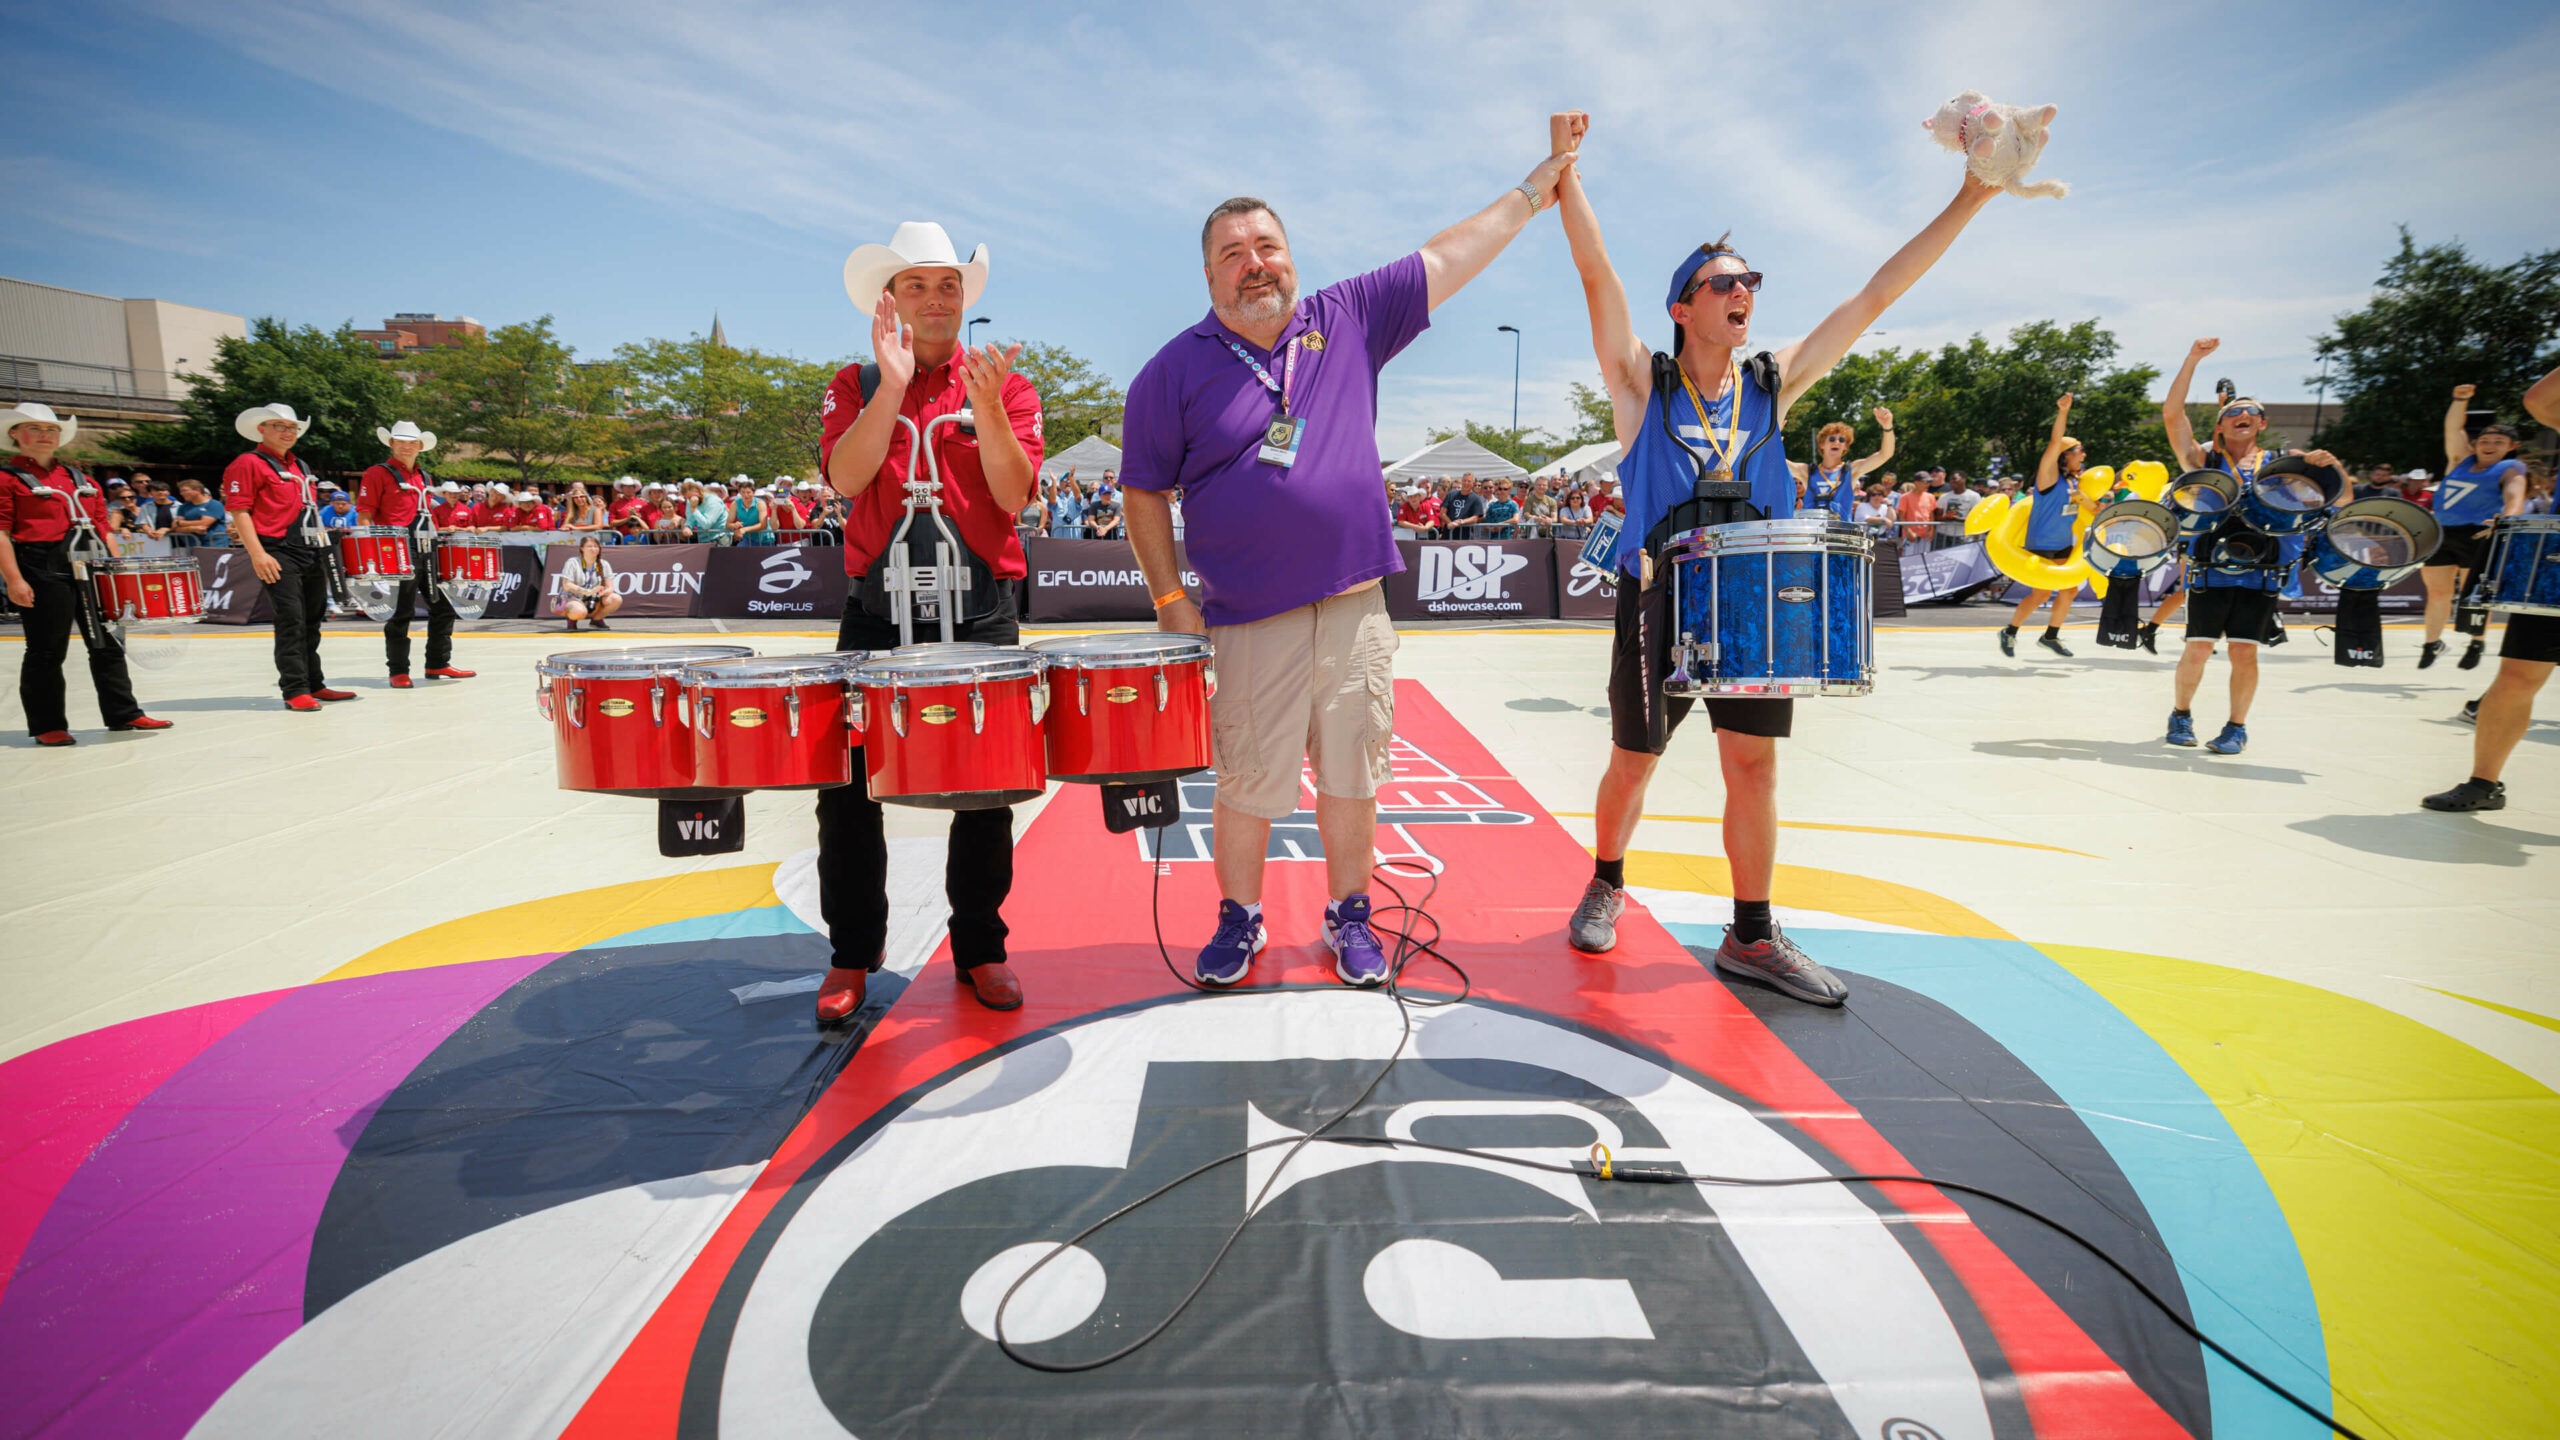 Eight drum lines from across North America faced off as part of DrumLine Battle action at the 2022 SoundSport International Music & Food Fest in Indy.